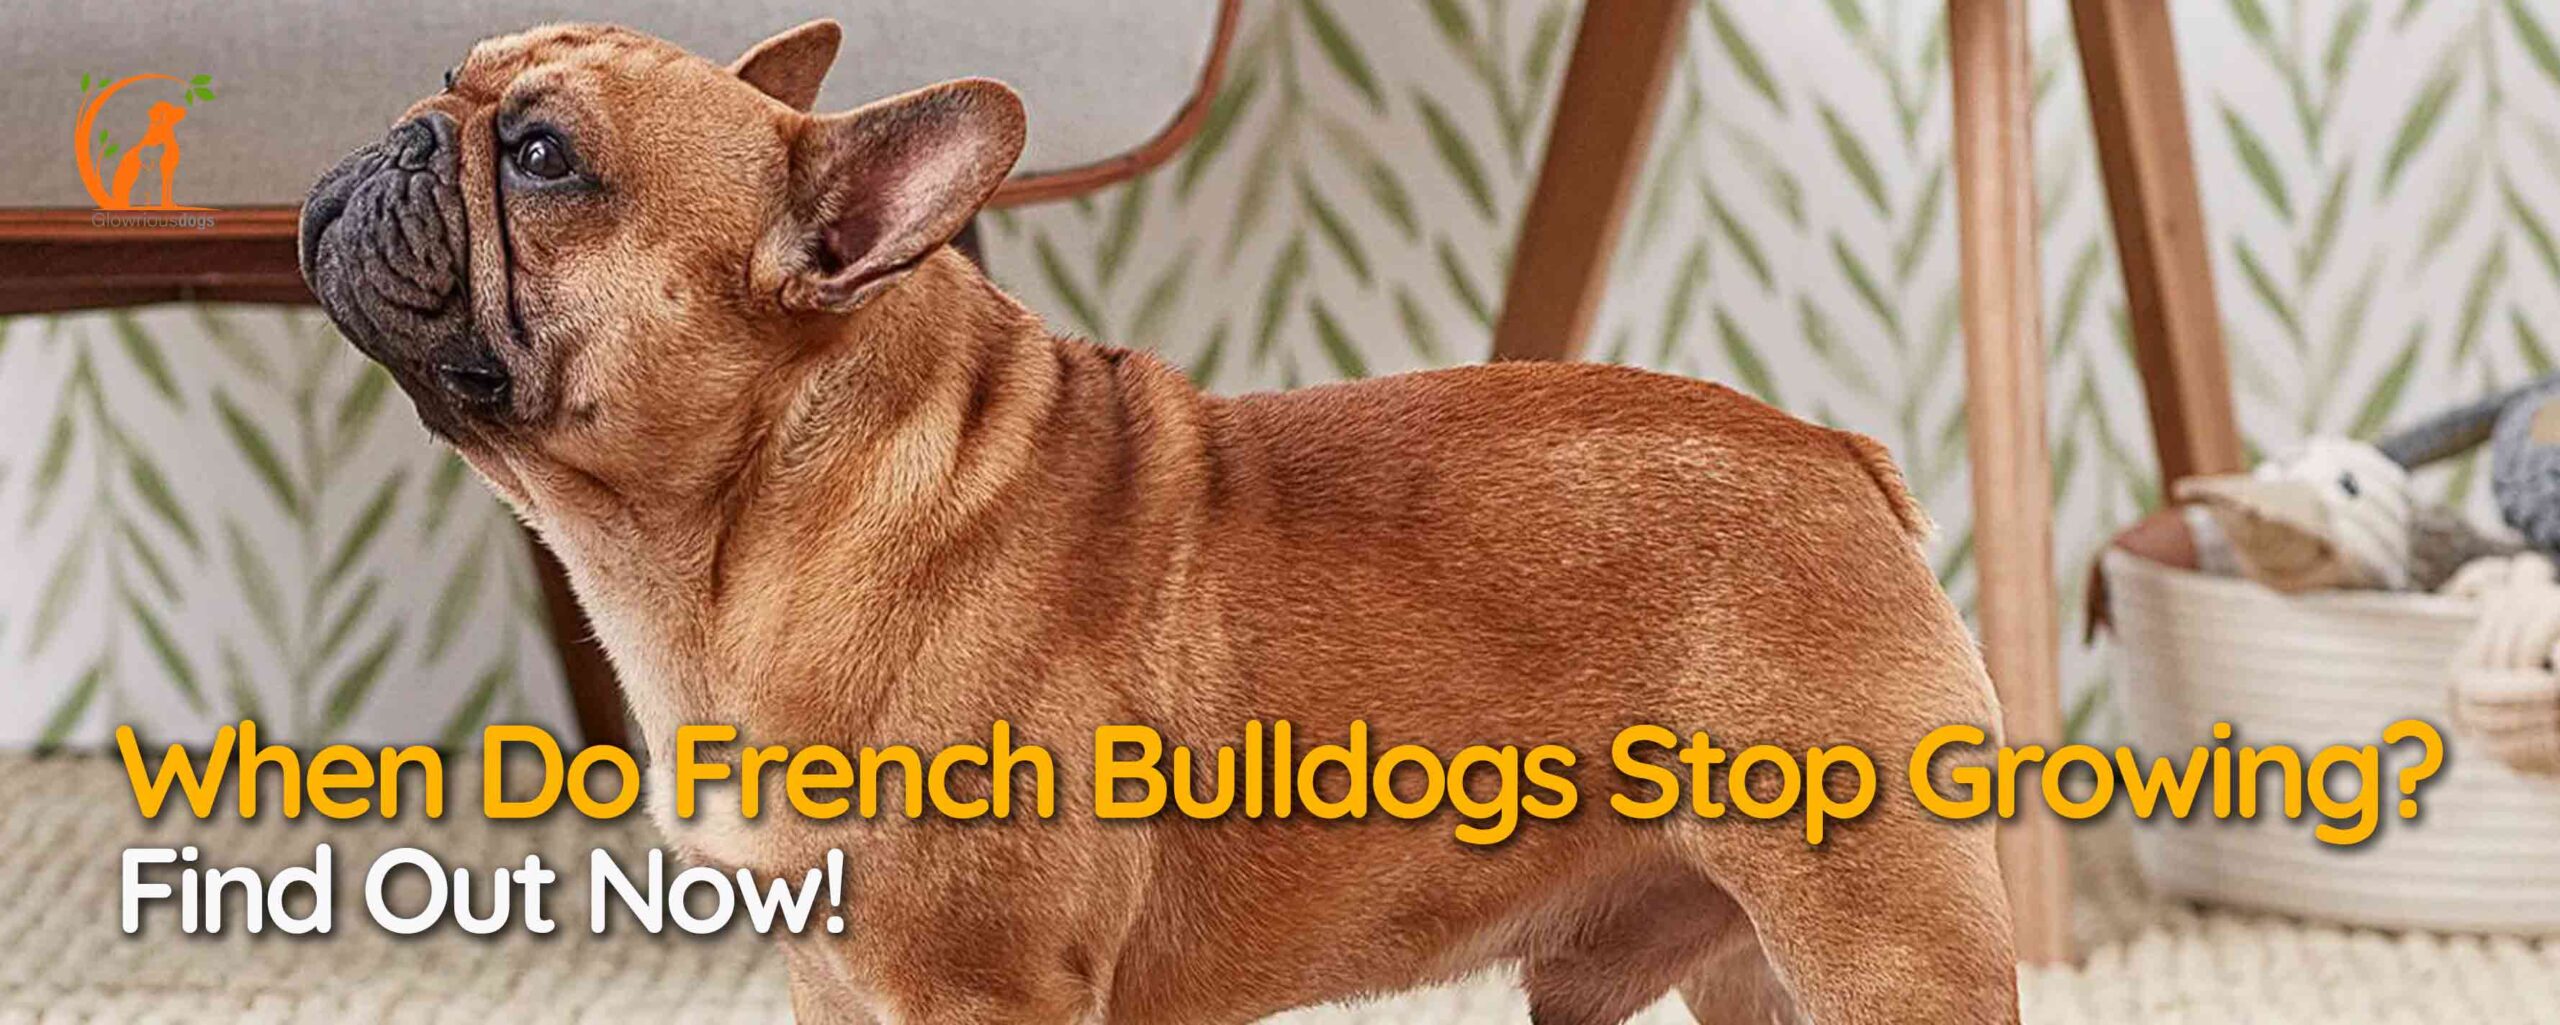 When Do French Bulldogs Stop Growing? Find Out Now!